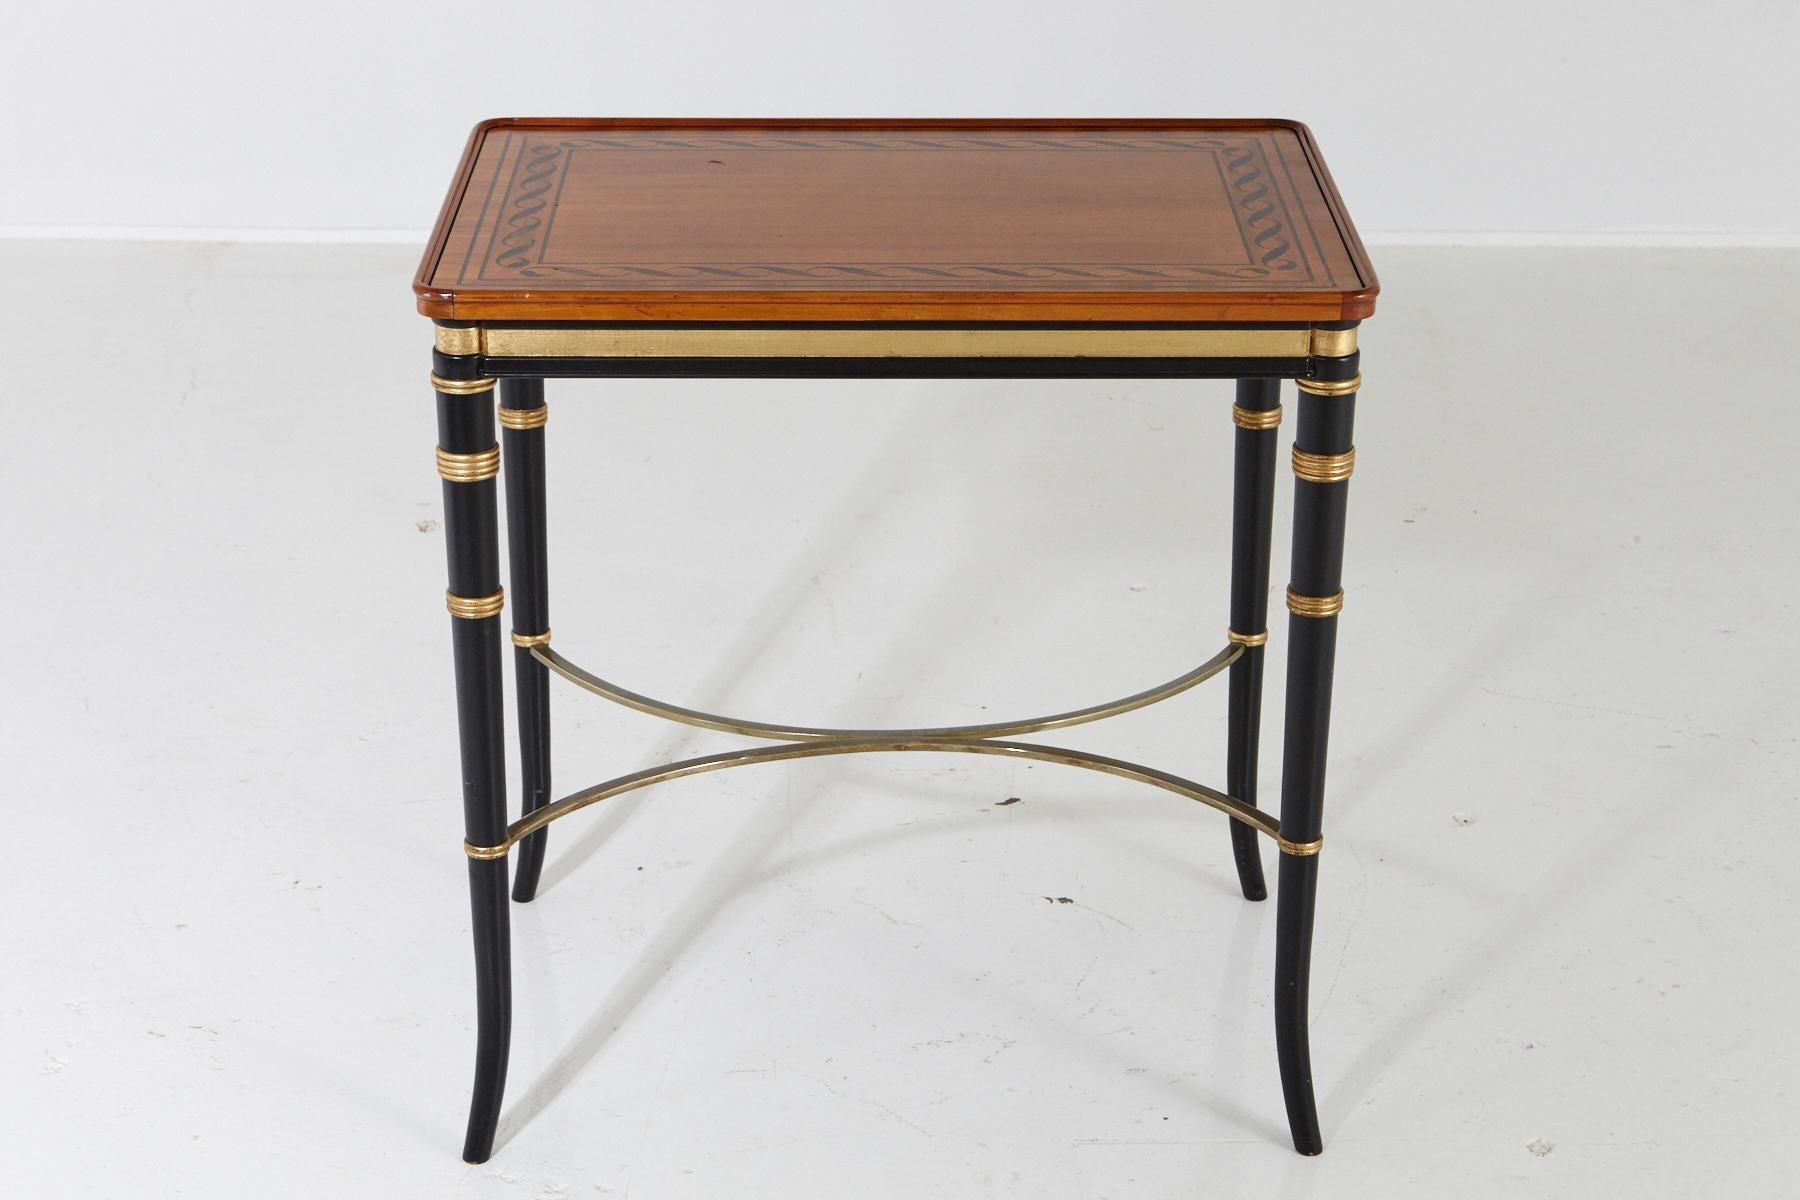 Beautiful eye-catching Regency style end table with paint decorated top and ebonized apron and legs with gilt rings, splayed feet, and brass reverse 